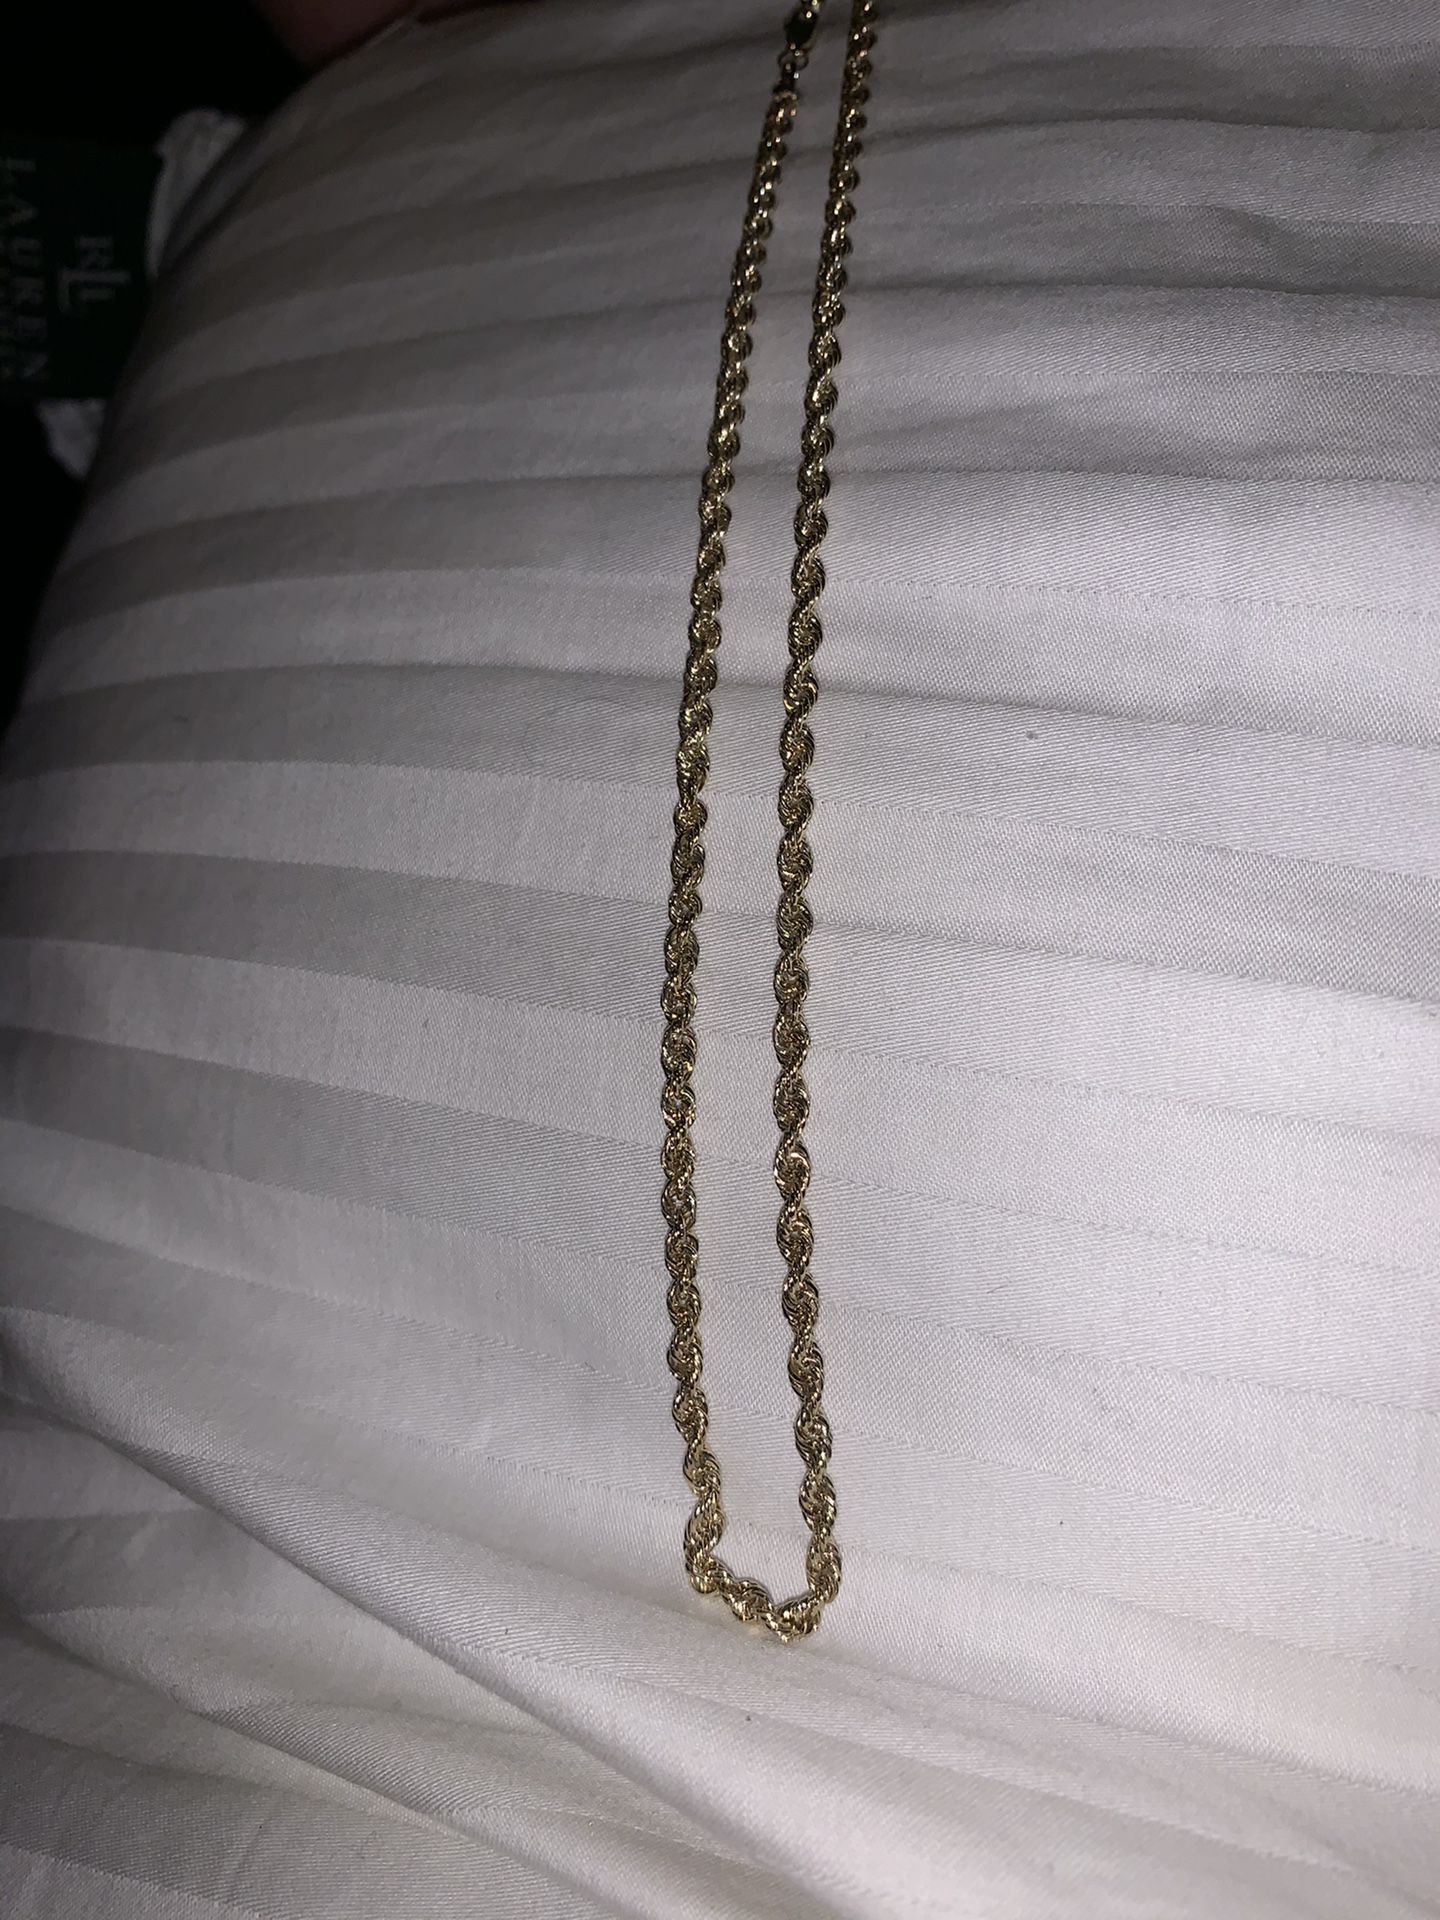 10 karat gold 18 inch rope hollow chain (REAL GOLD)